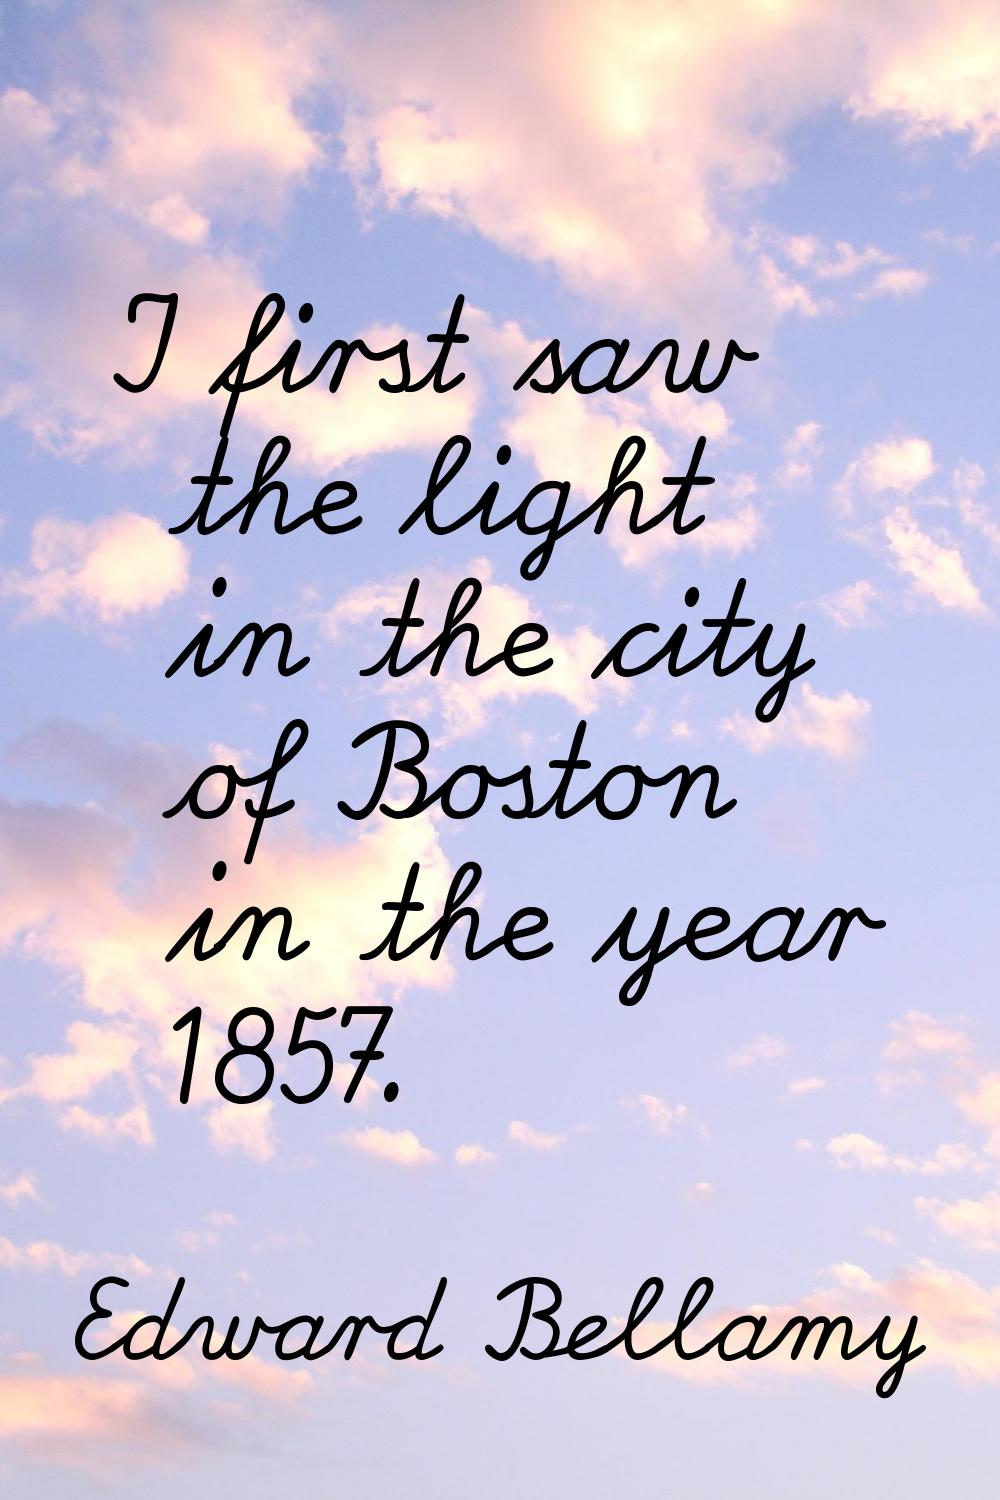 I first saw the light in the city of Boston in the year 1857.